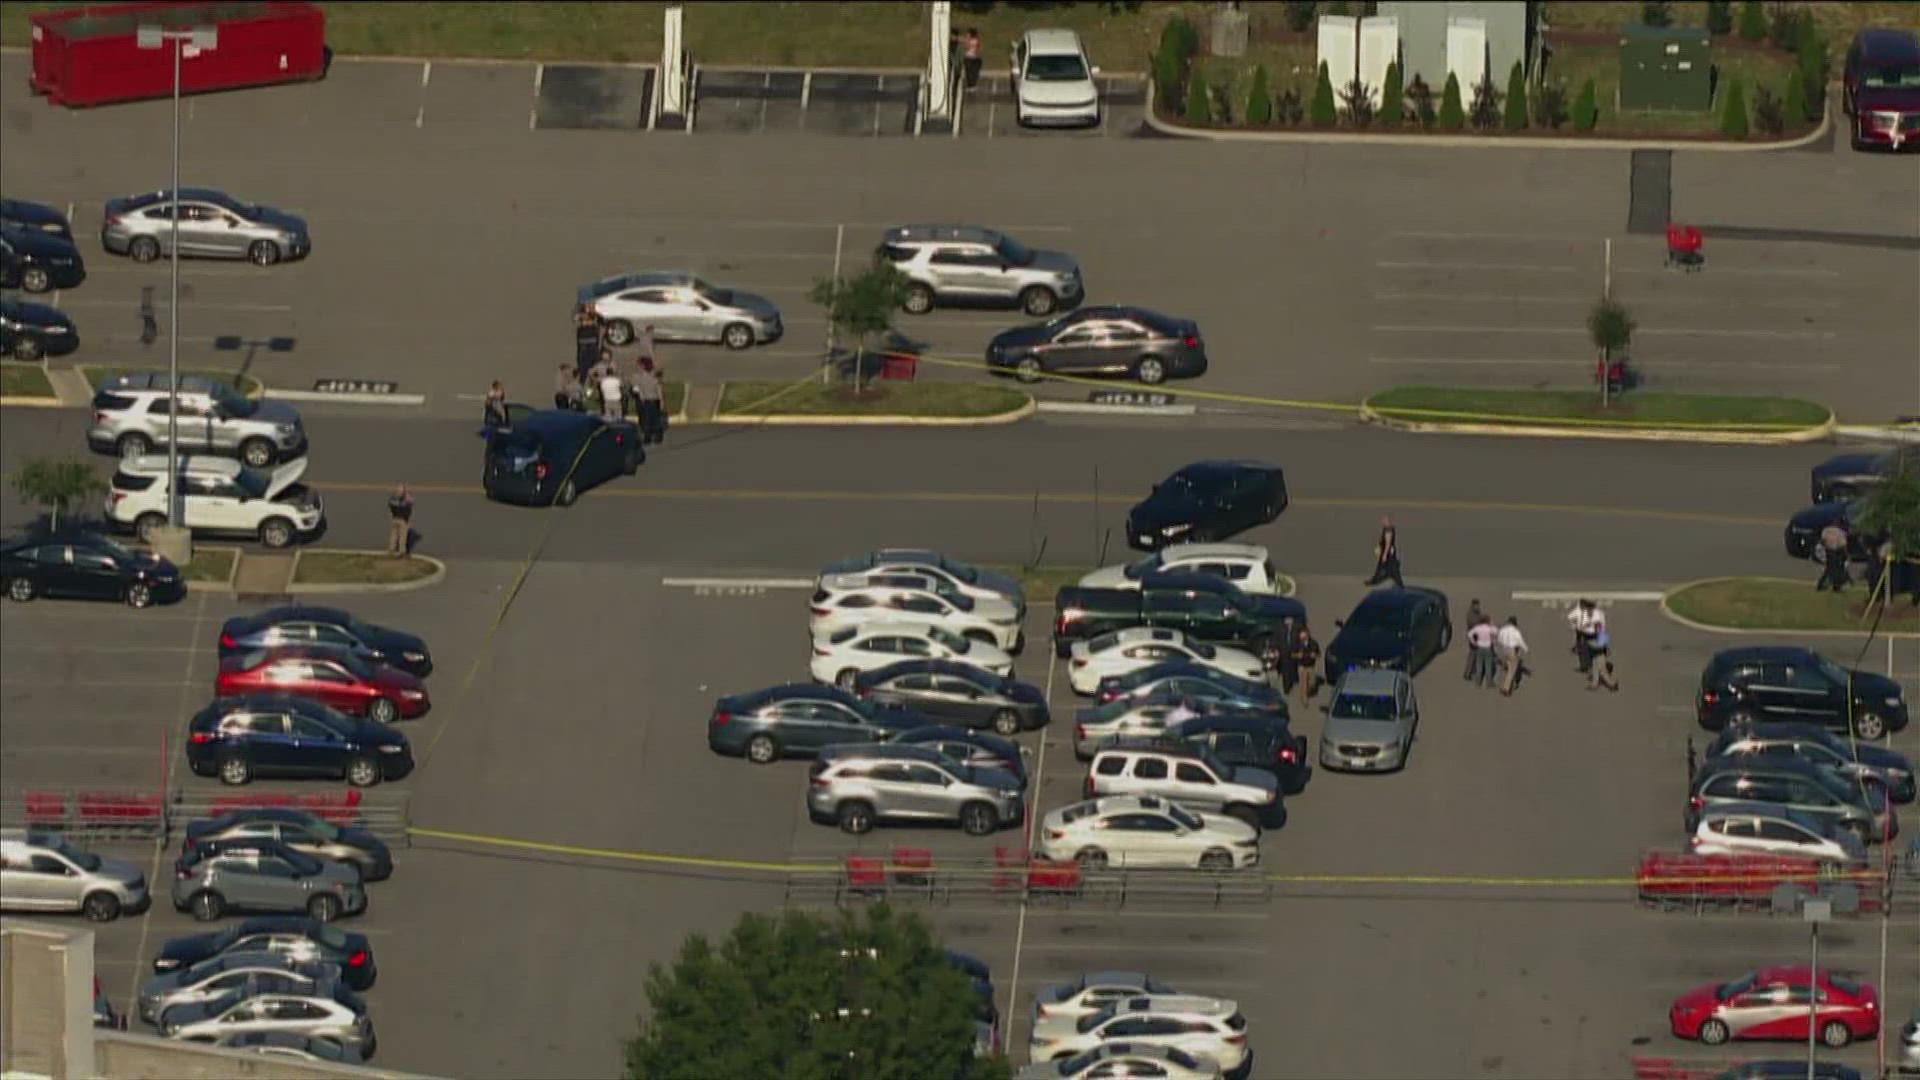 Fairfax County Police says the shooting happened when officers tried to stop a "wanted man."